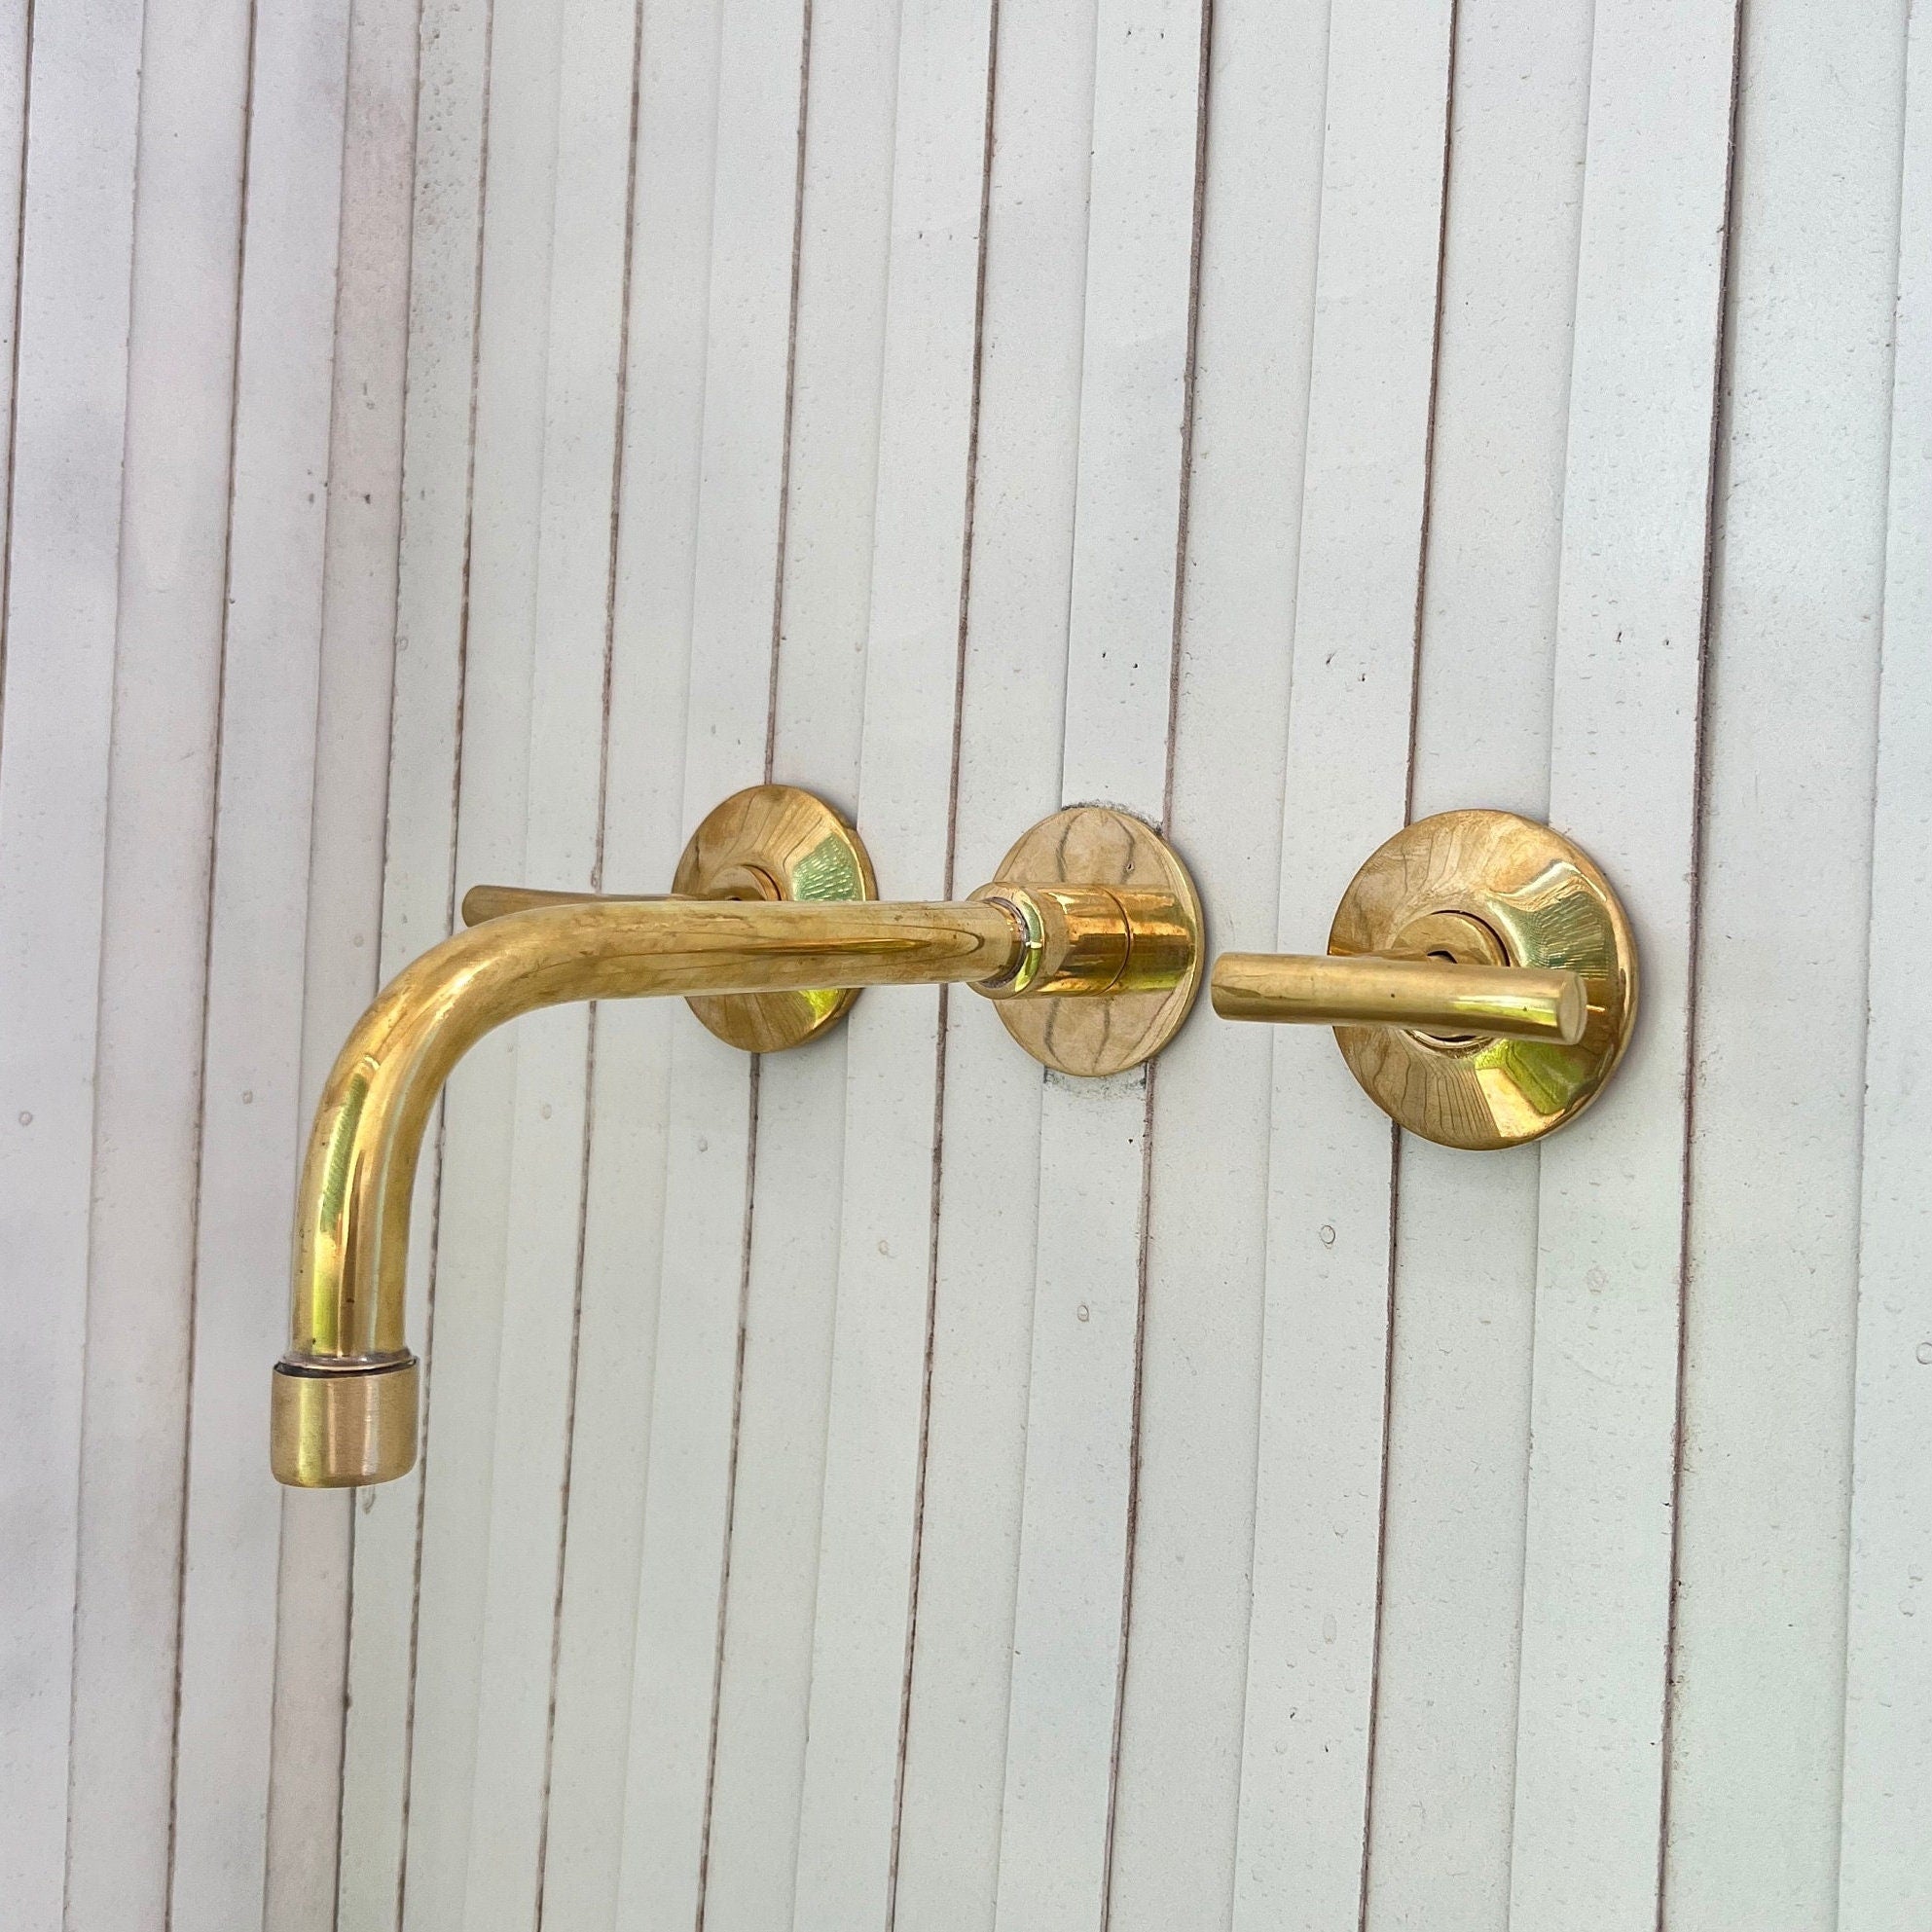 Wall Bathroom Faucet With Lever Handles in Unlacquered Brass - Gold Bathroom Faucet